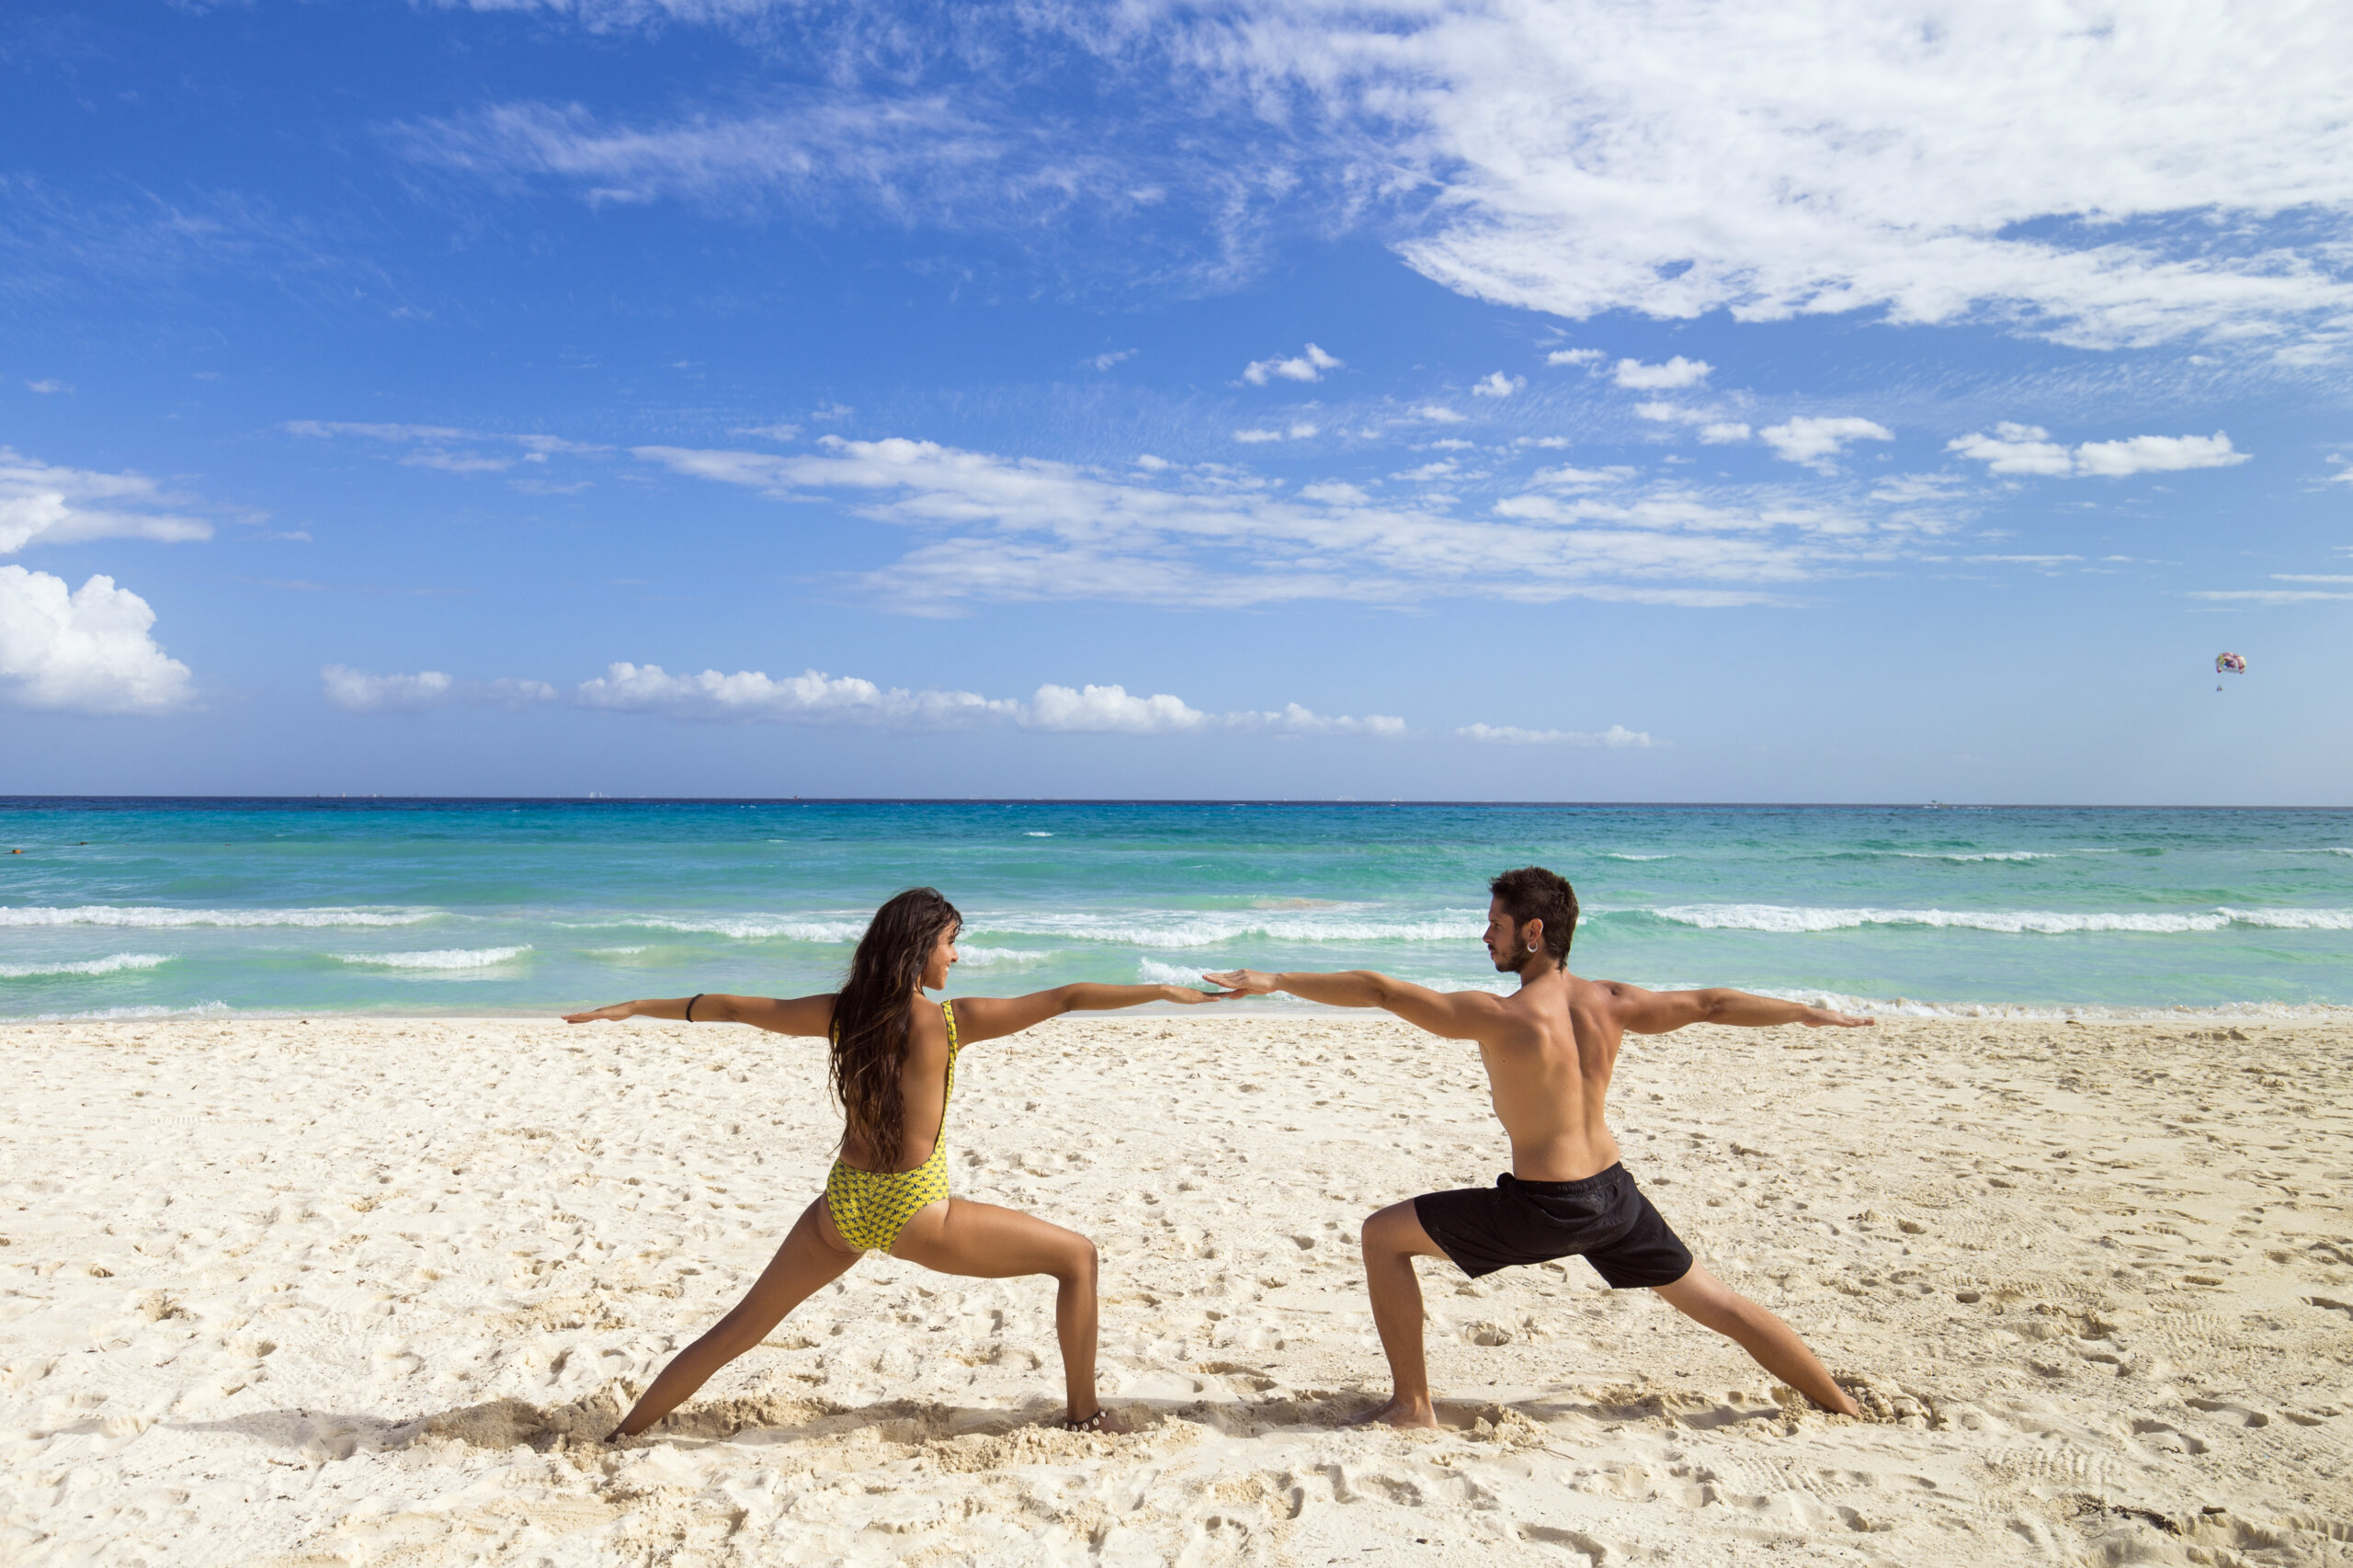 Couple practicing yoga together at the beach. Playa del Carmen, Mexico